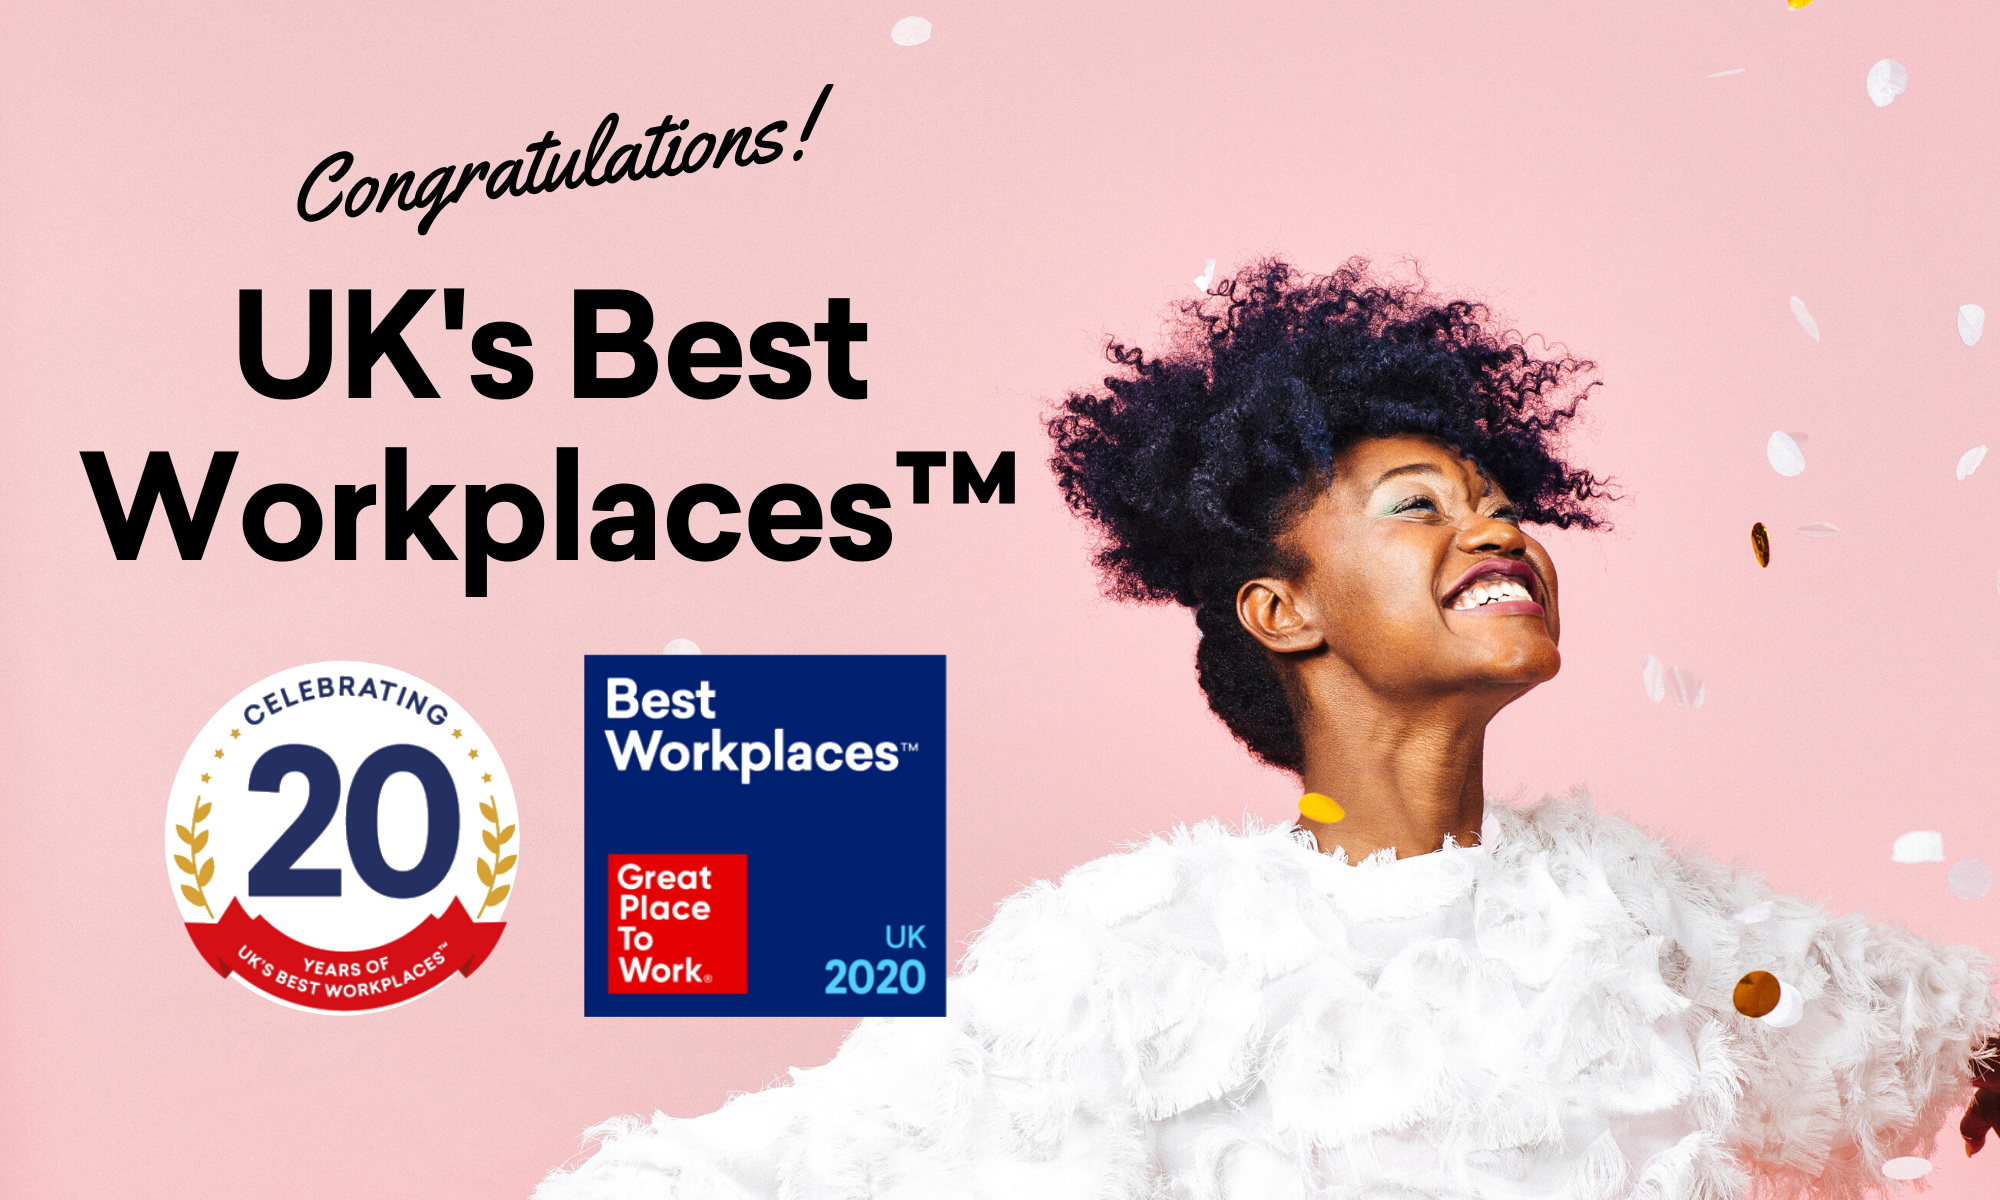 Announced: UK's Best Workplaces 2020